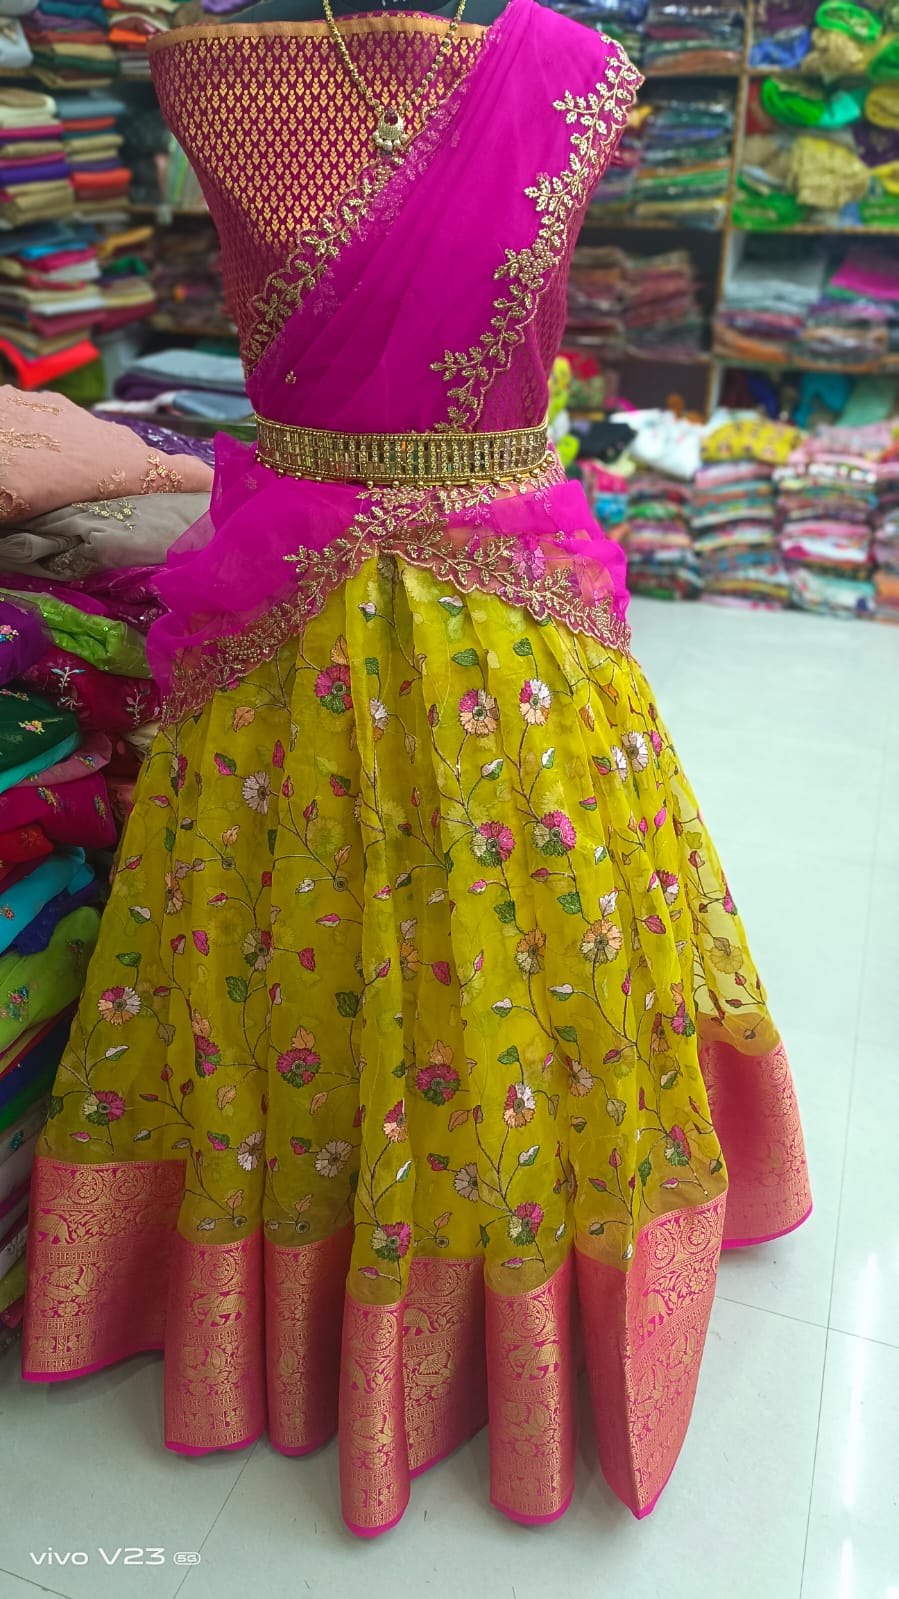 Organza Lehenga with floral embroidery work - Sheetal Fashionzz